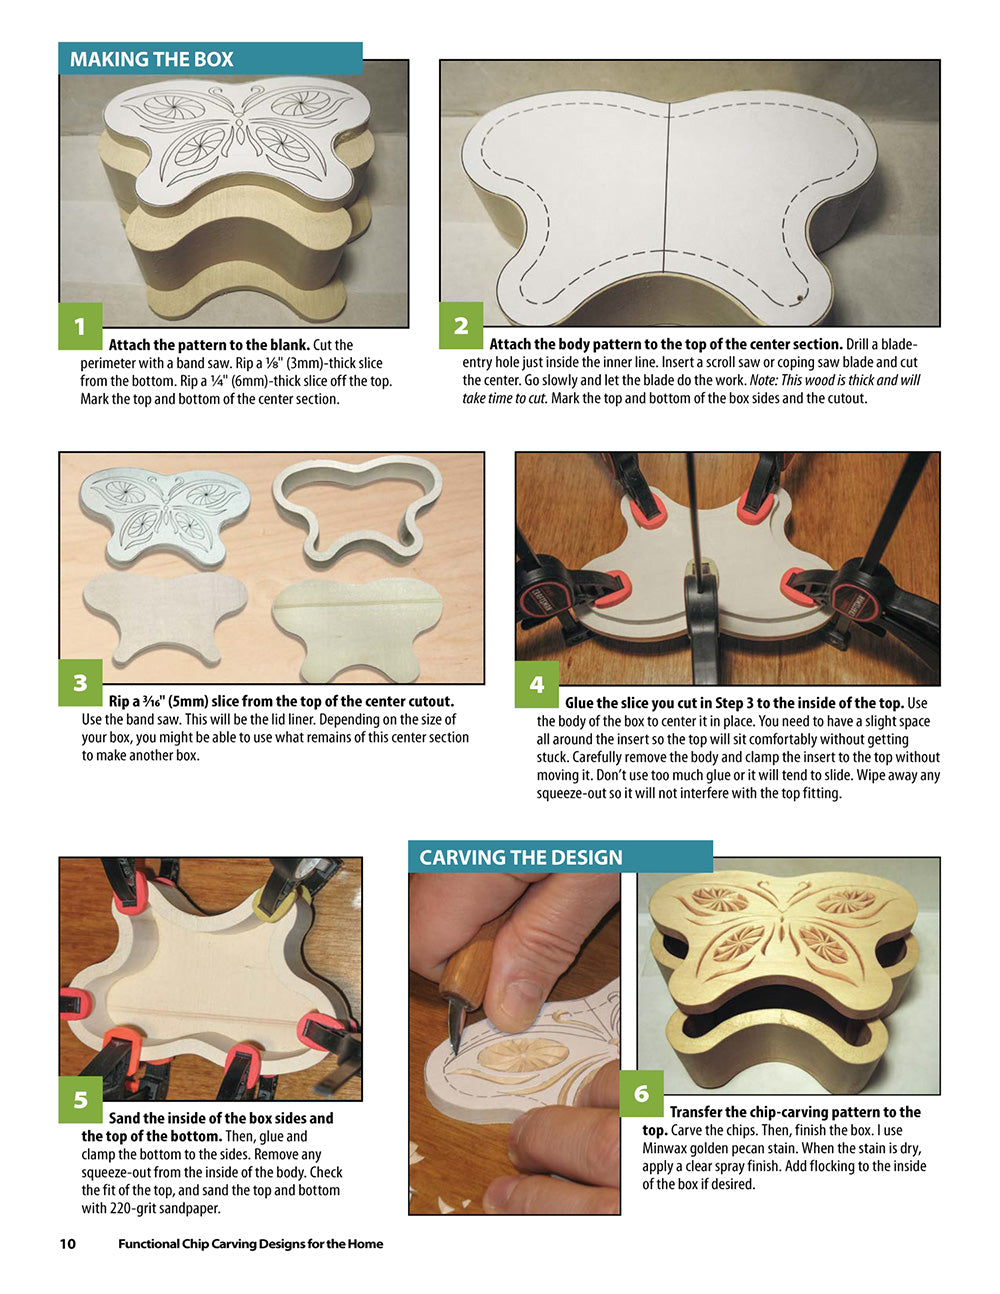 Functional Chip Carving Designs for the Home